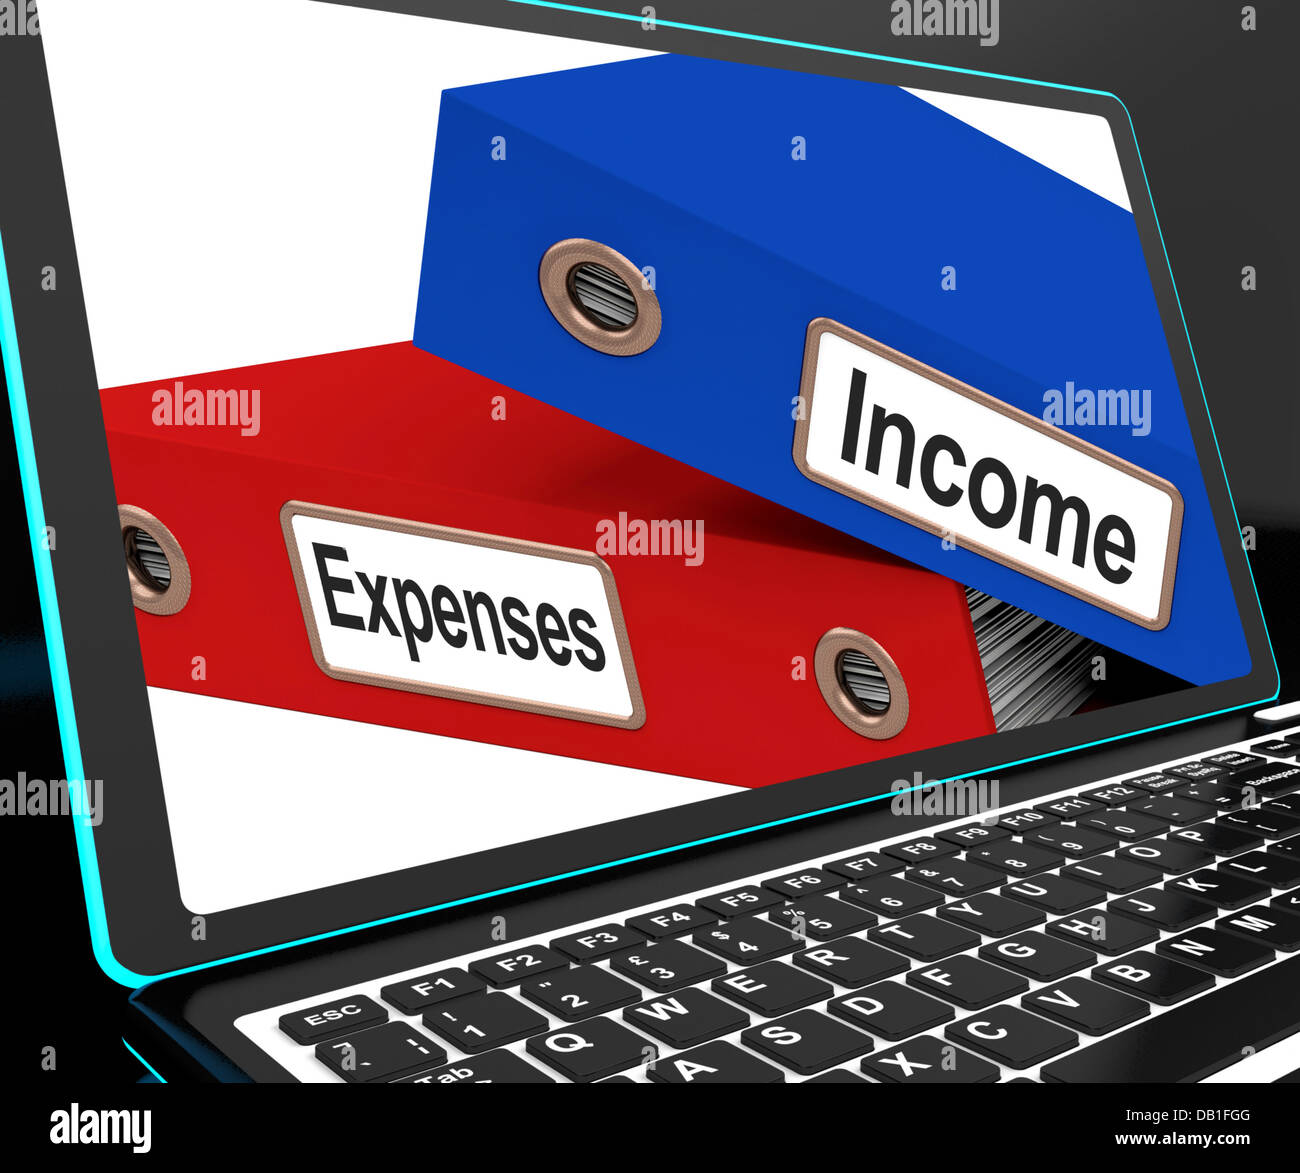 Income And Expenses Files On Laptop Shows Budgeting Stock Photo